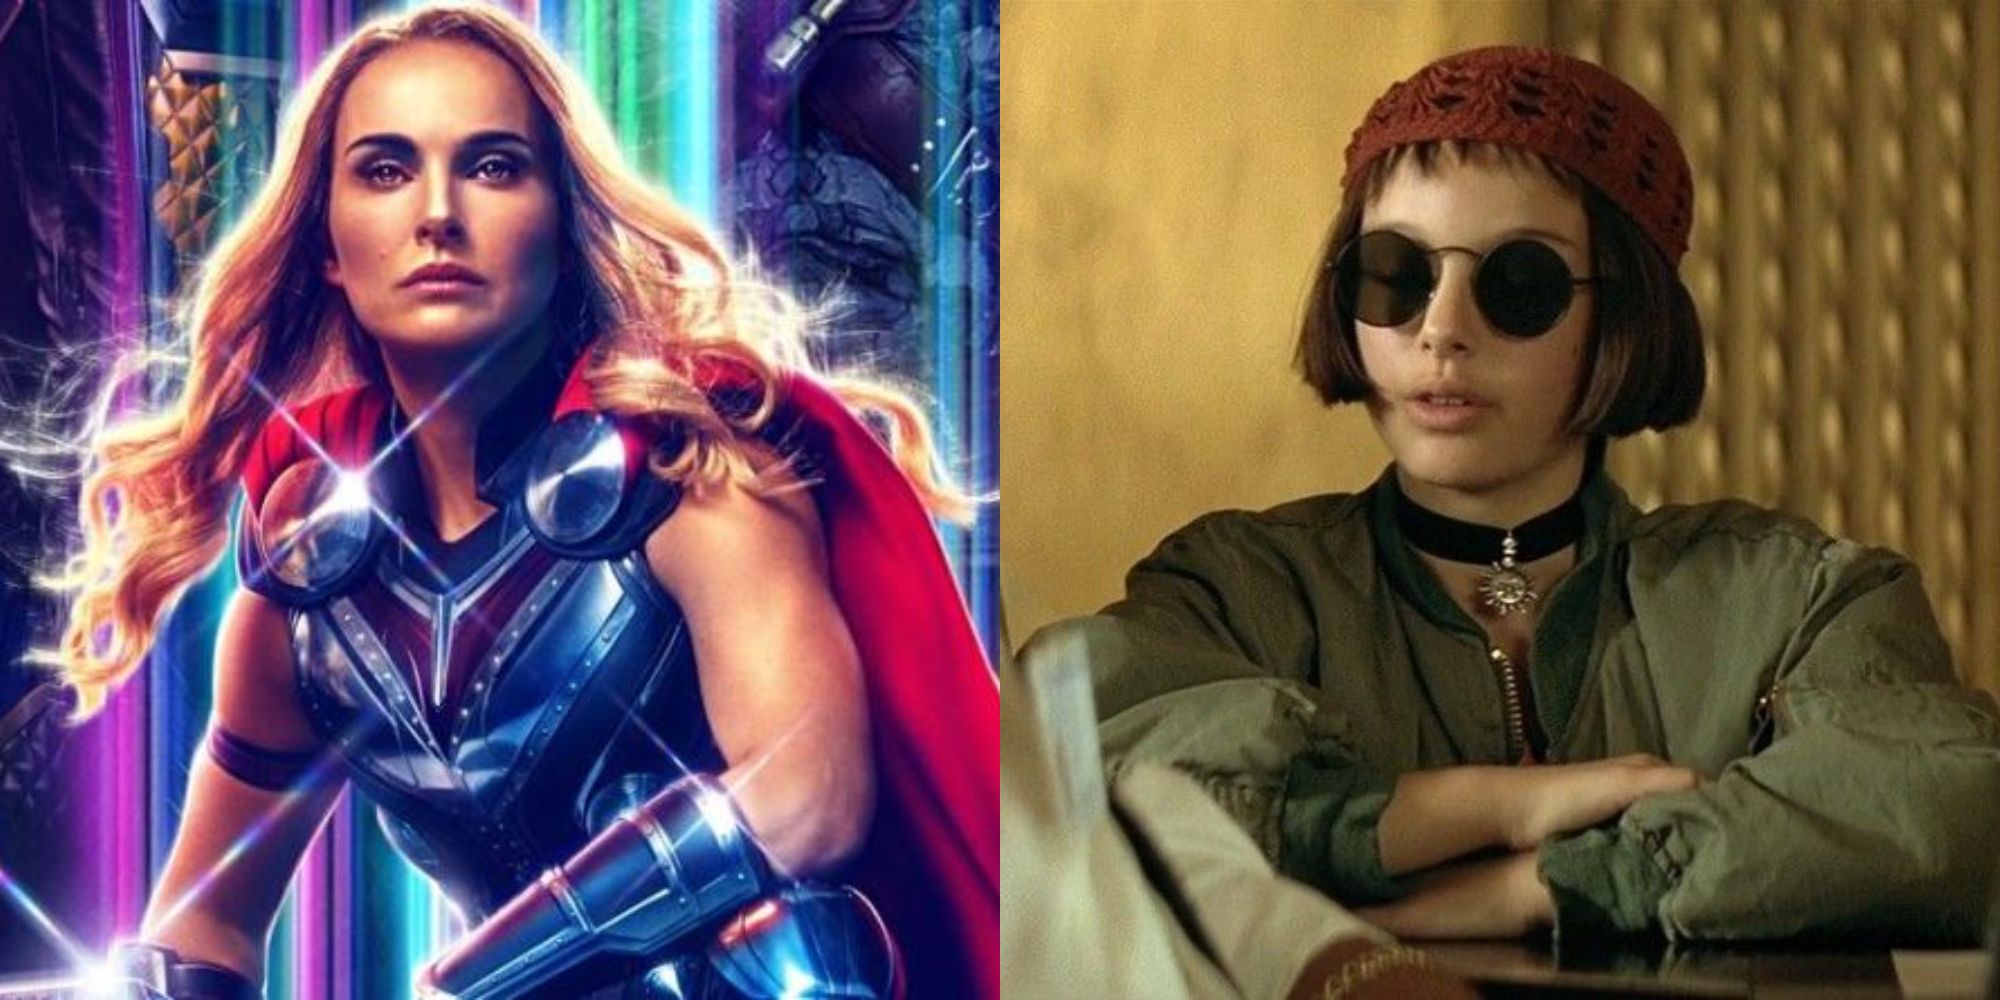 Split image showing Natalie Portman in Thor Love and Thunder and Léon The Professional.